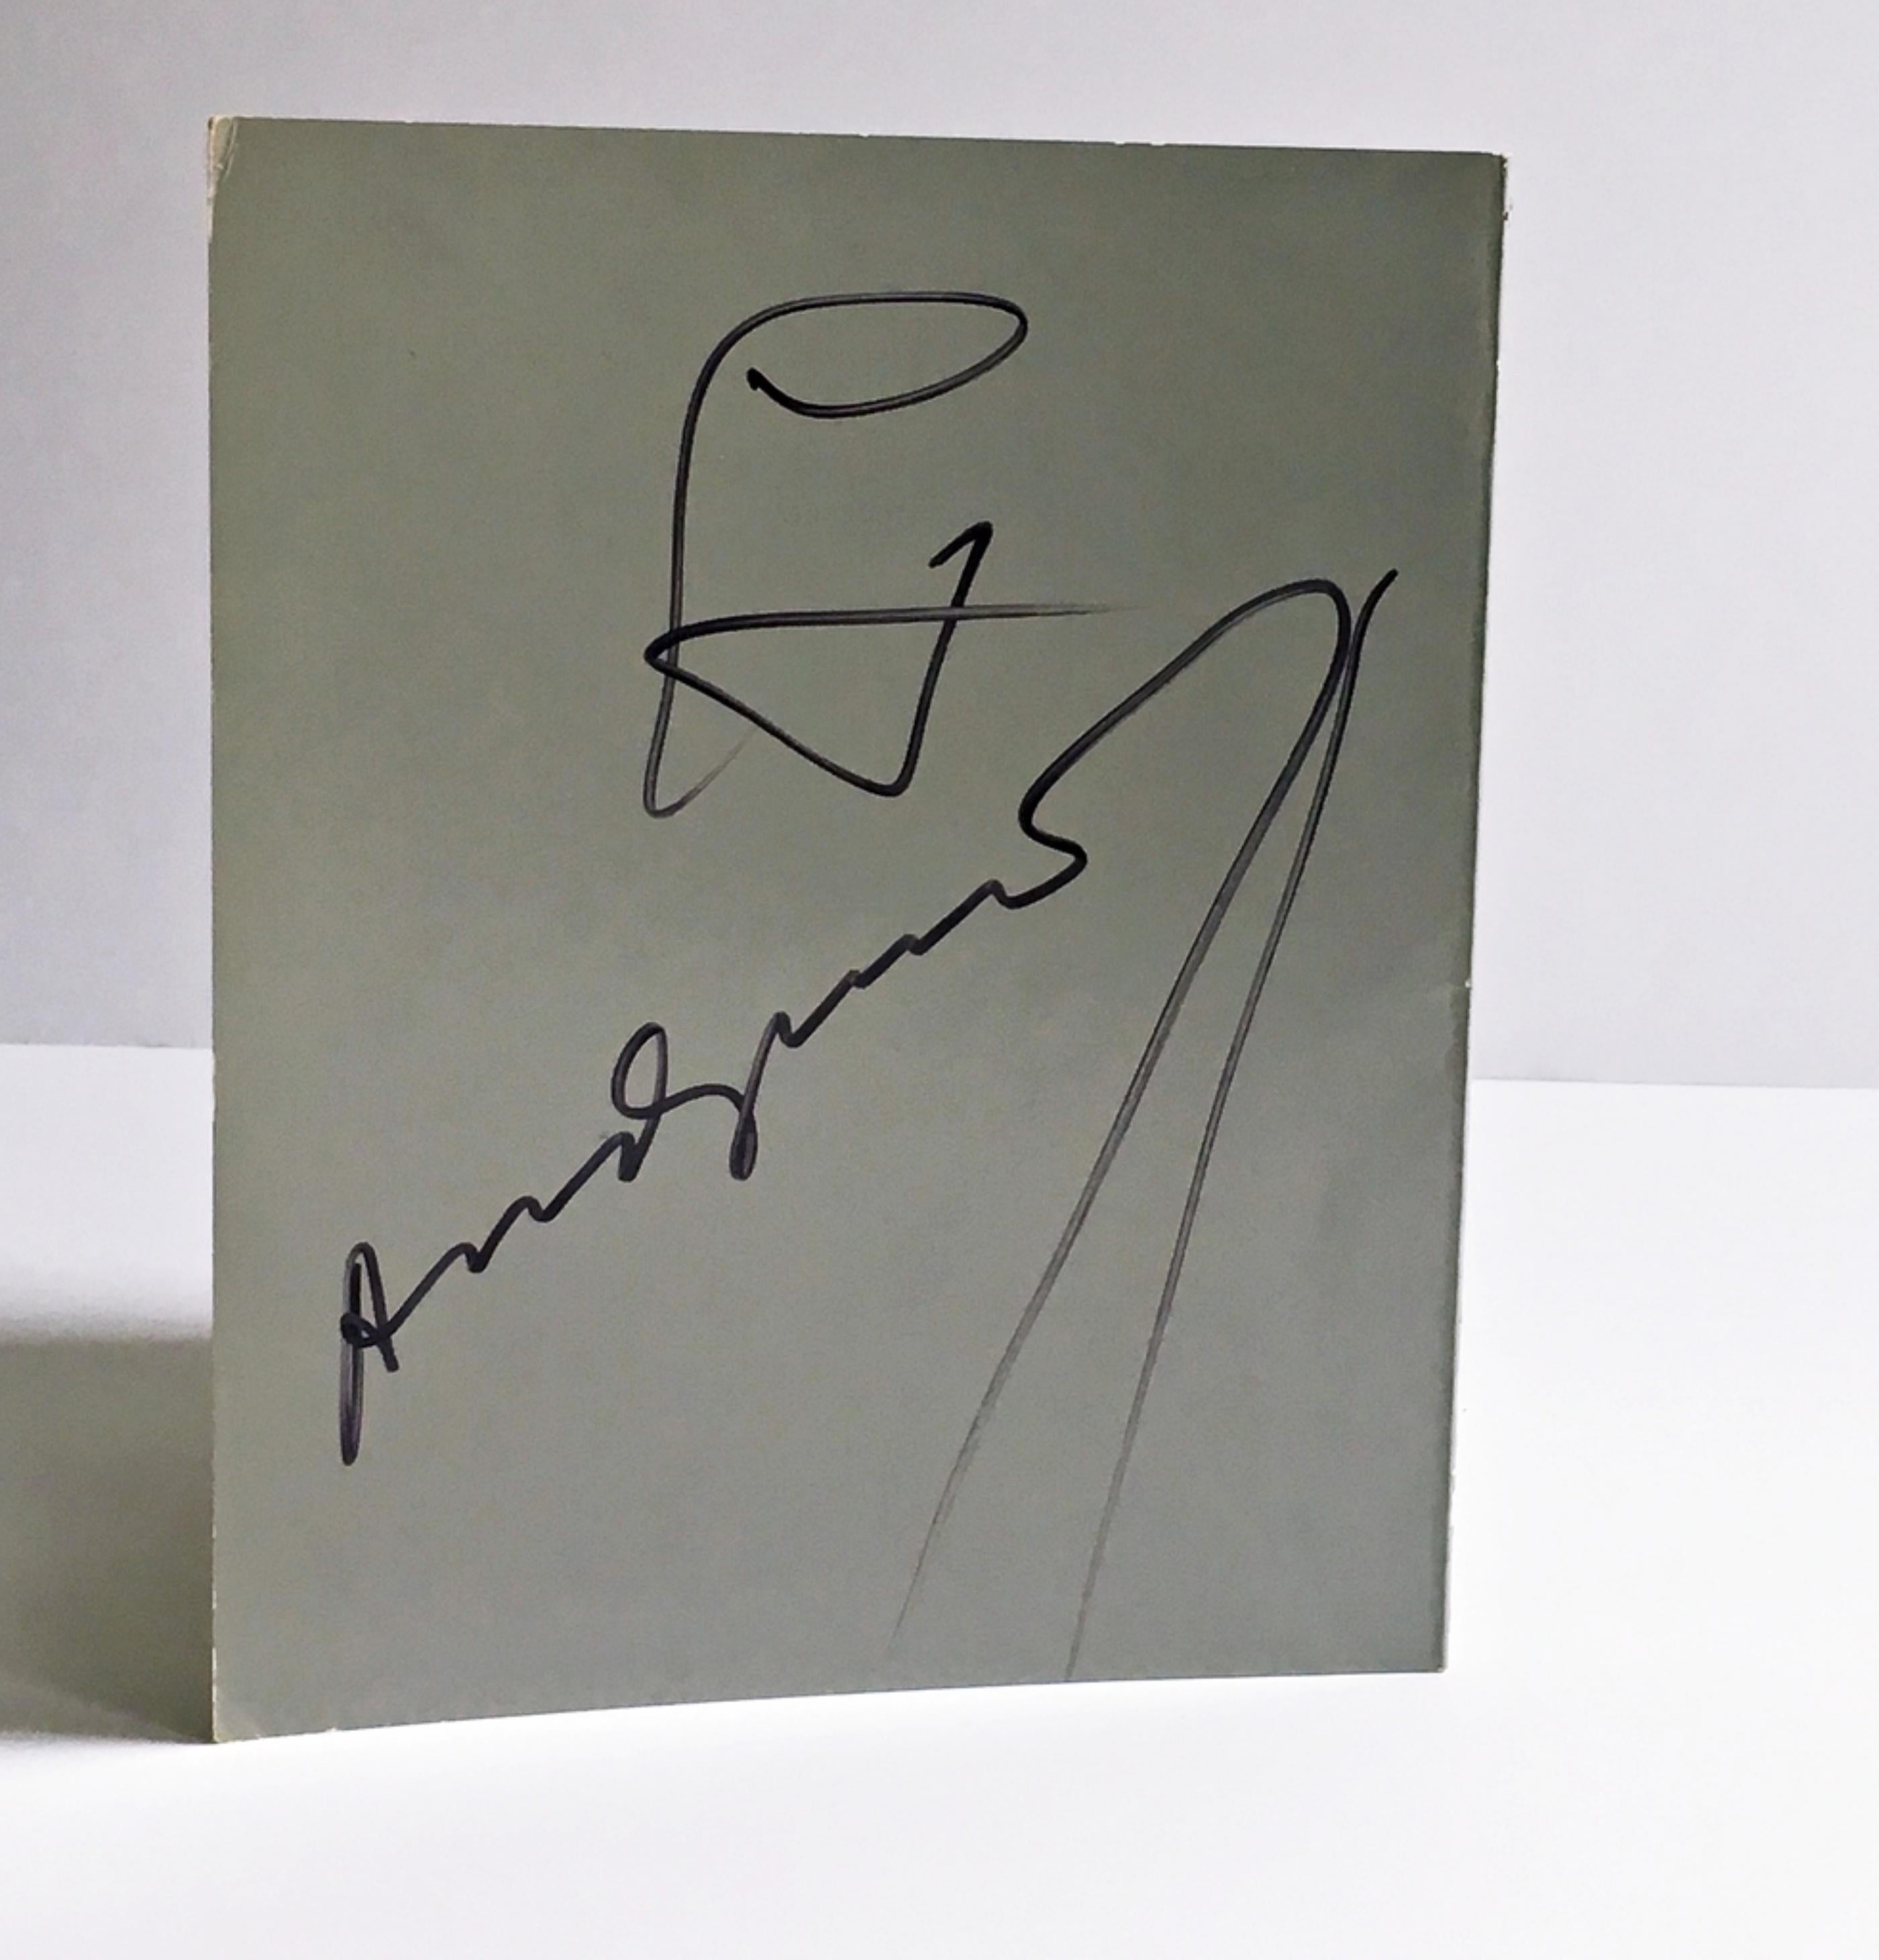 Andy Warhol
Andy Warhol at Pace/Columbus (Hand signed during official signing), 1978
Super rare Limited Edition Fold-out Offset lithograph invitation. 
Boldly signed and inscribed by Andy Warhol in black marker on the back flap.
7 3/10 × 11 1/2